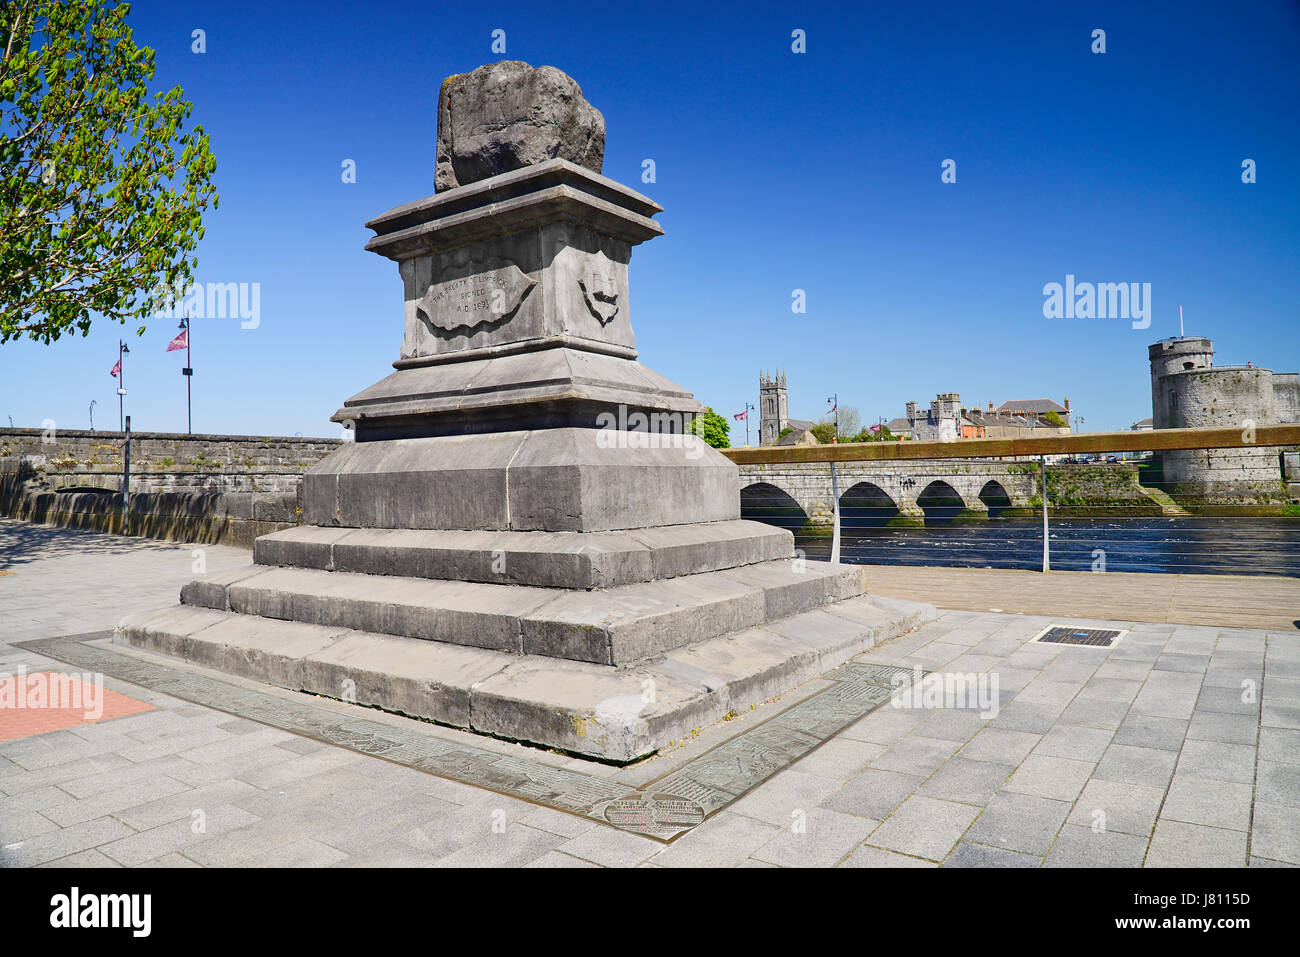 Ireland, County Limerick, Limerick City, The Treaty Stone with the River Shannon and St John's Castle. Stock Photo